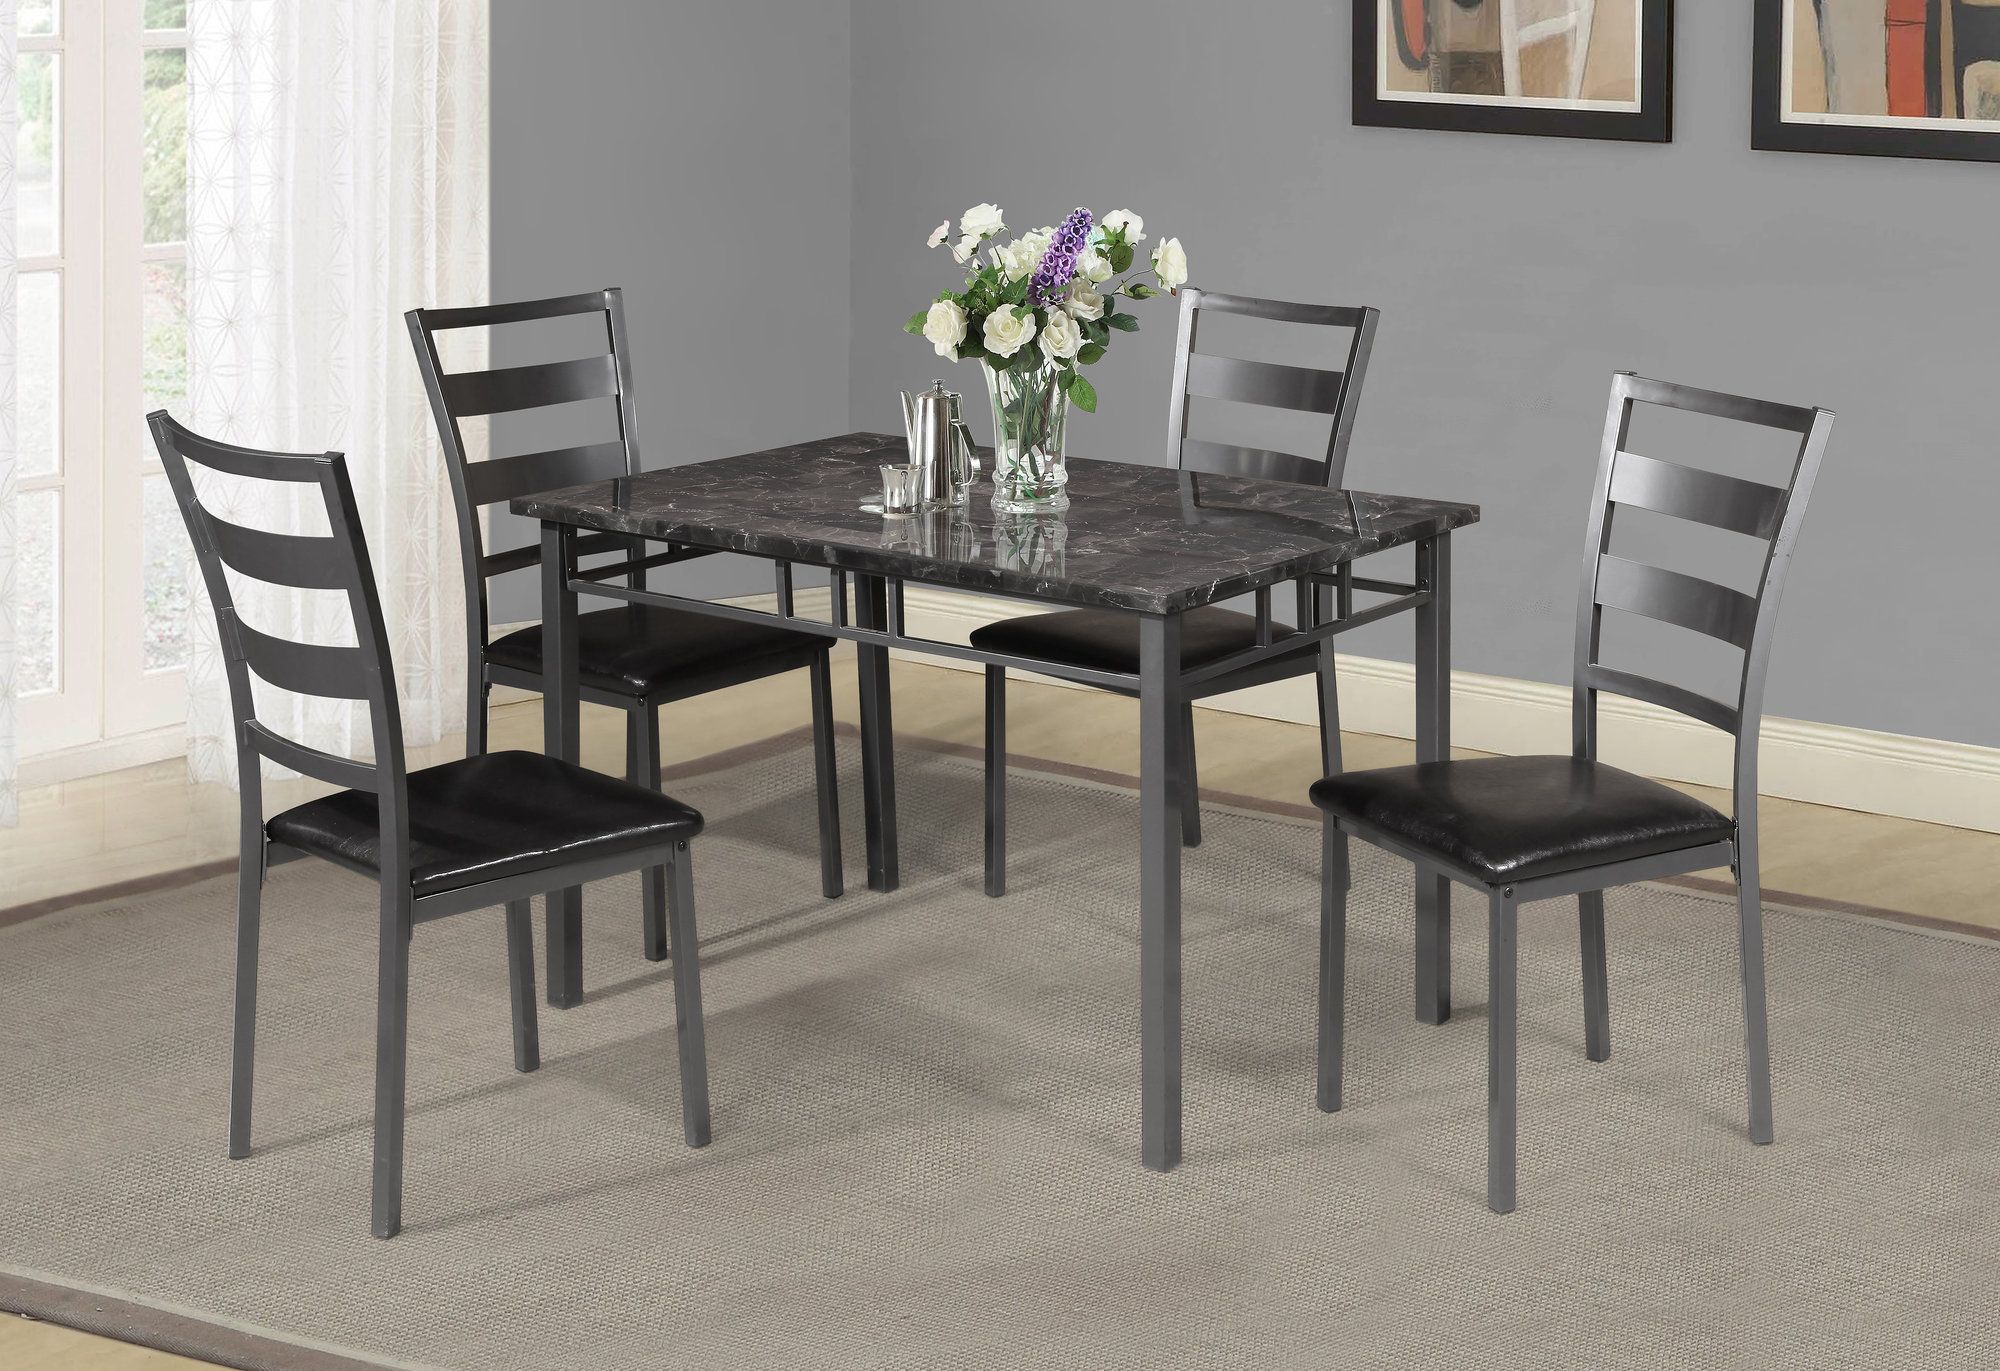 Details About Winston Porter Berke 5 Piece Dining Set Throughout Newest Miskell 3 Piece Dining Sets (Photo 35402 of 35622)